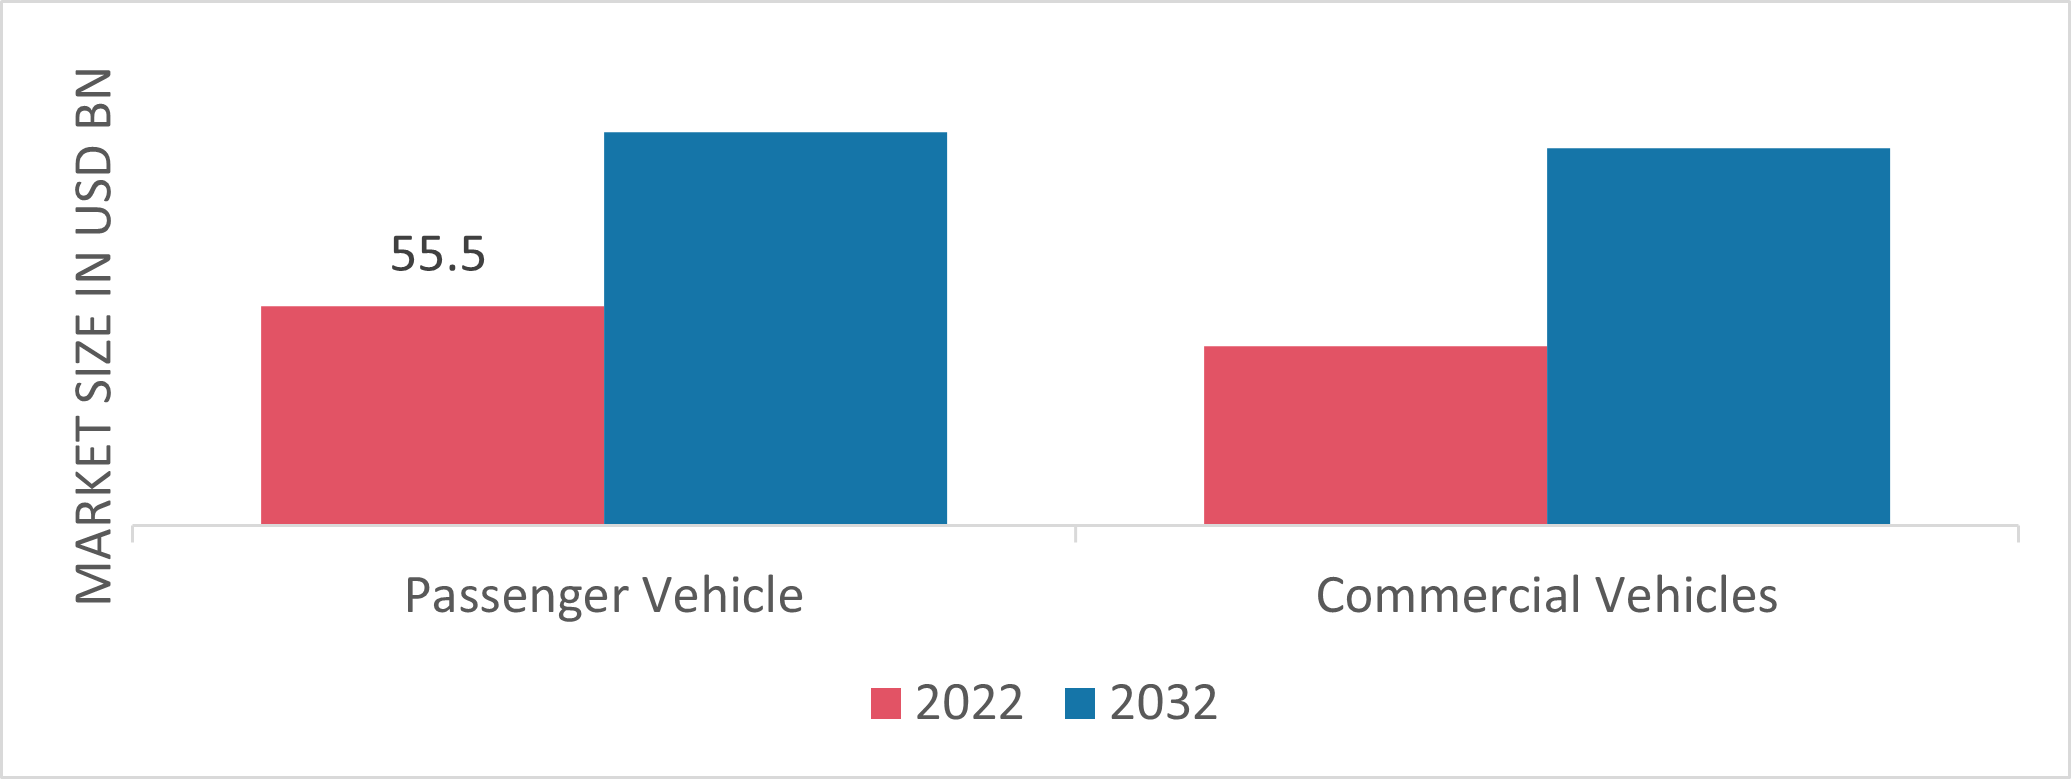 Alloys for Automotive Market, by Vehicle, 2022 & 2032